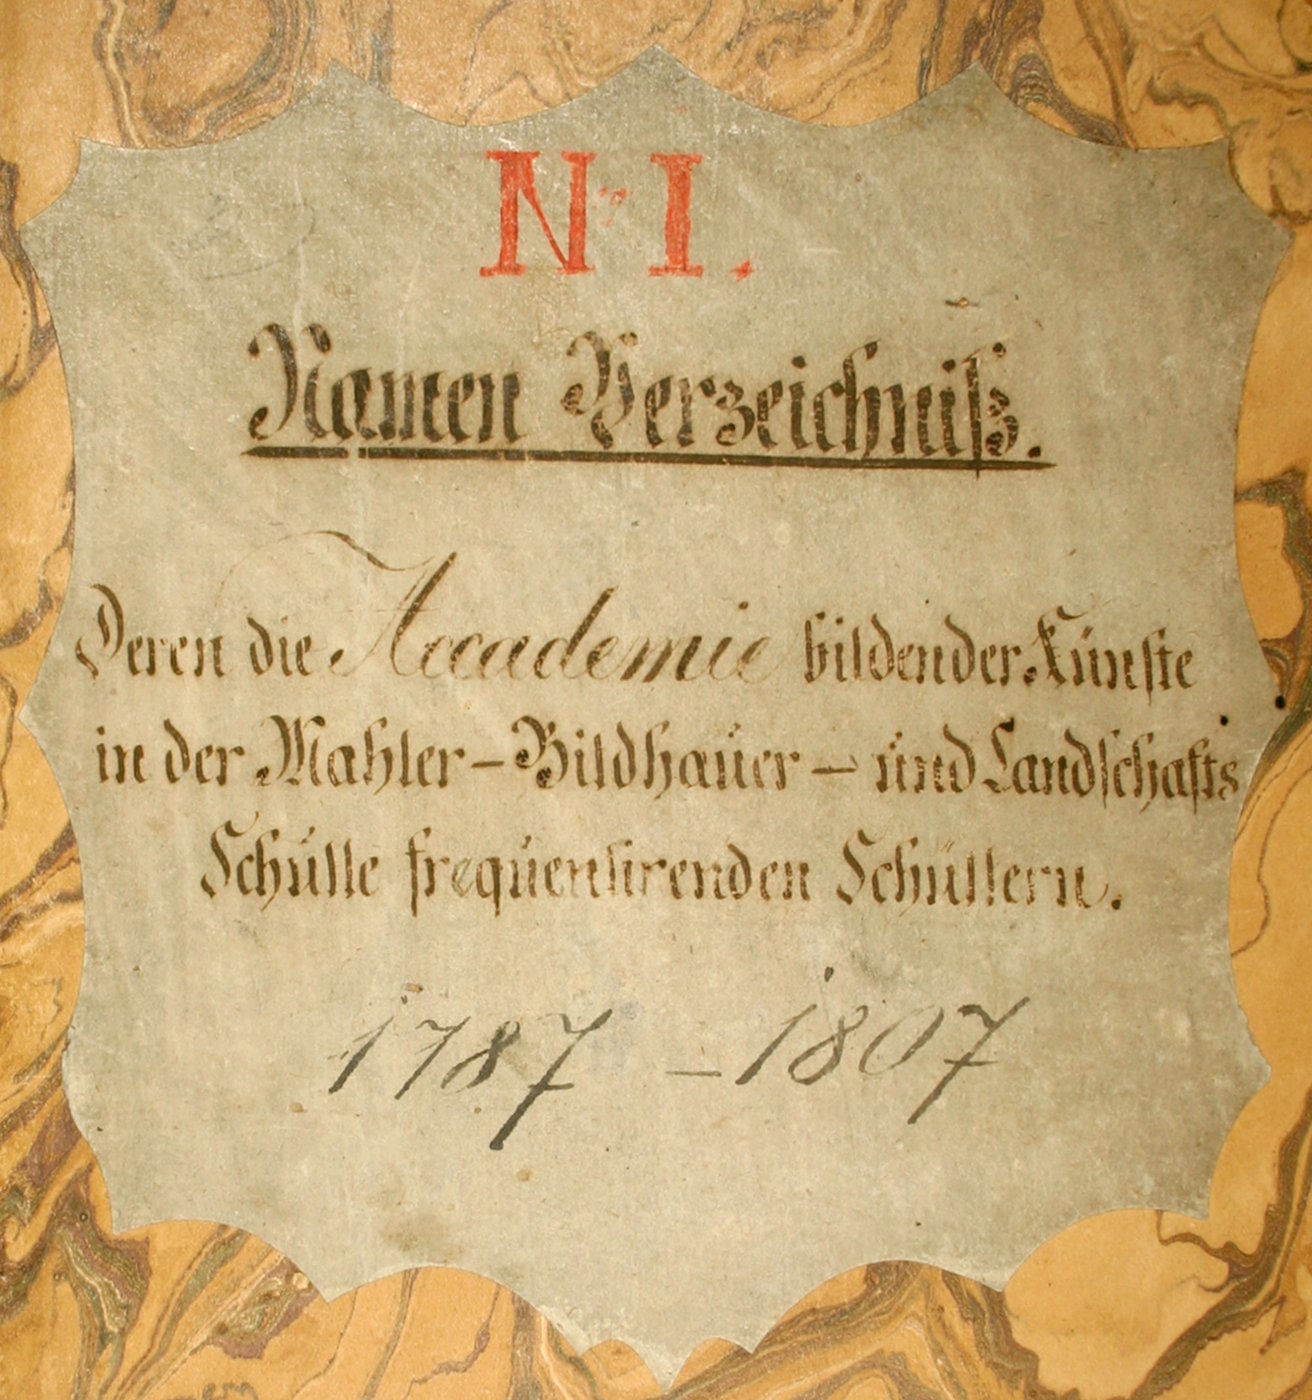 Cover page of a matriculation book, bound in patterned beige-yellow paper, with a label on it, title and date handwritten in decorative script, brown ink on paper.